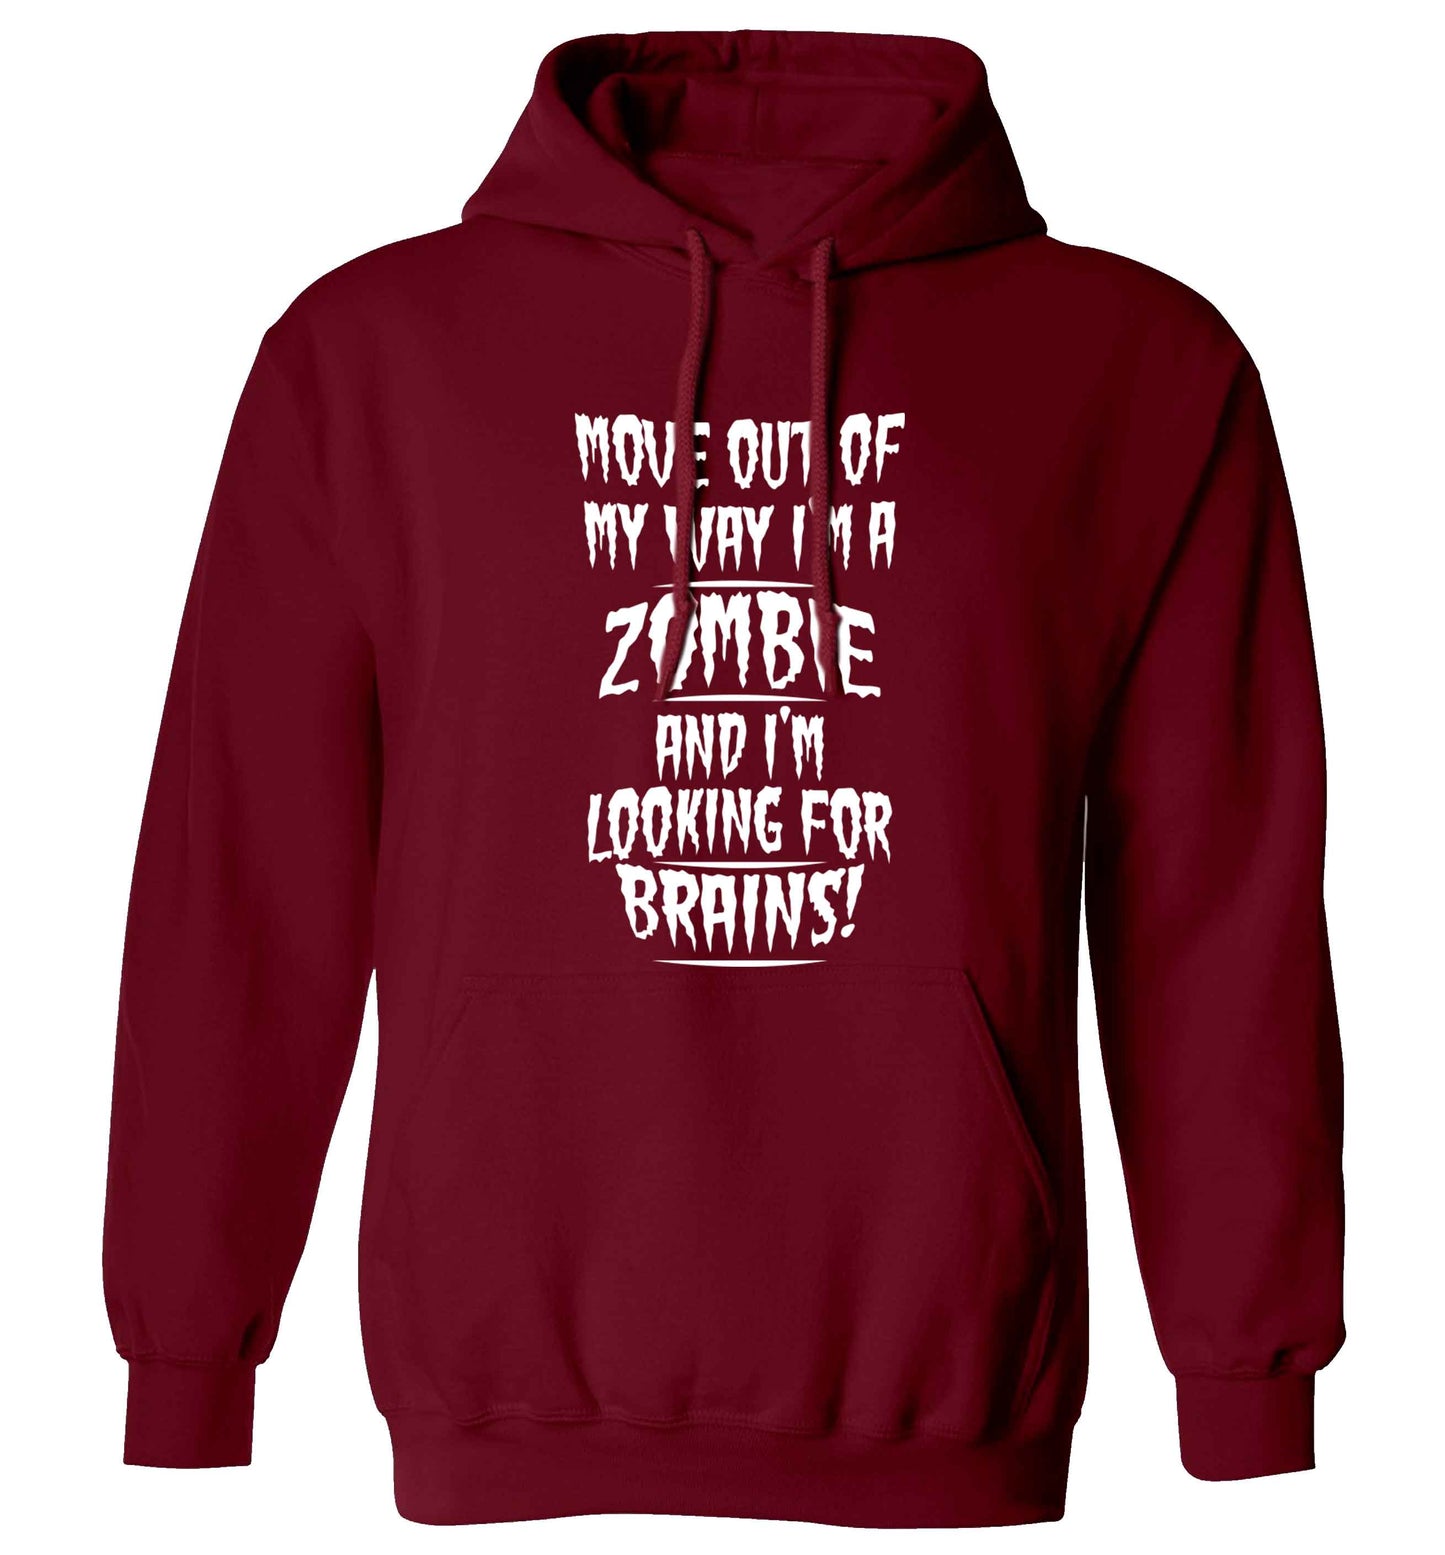 I'm a zombie and I'm looking for brains! adults unisex maroon hoodie 2XL